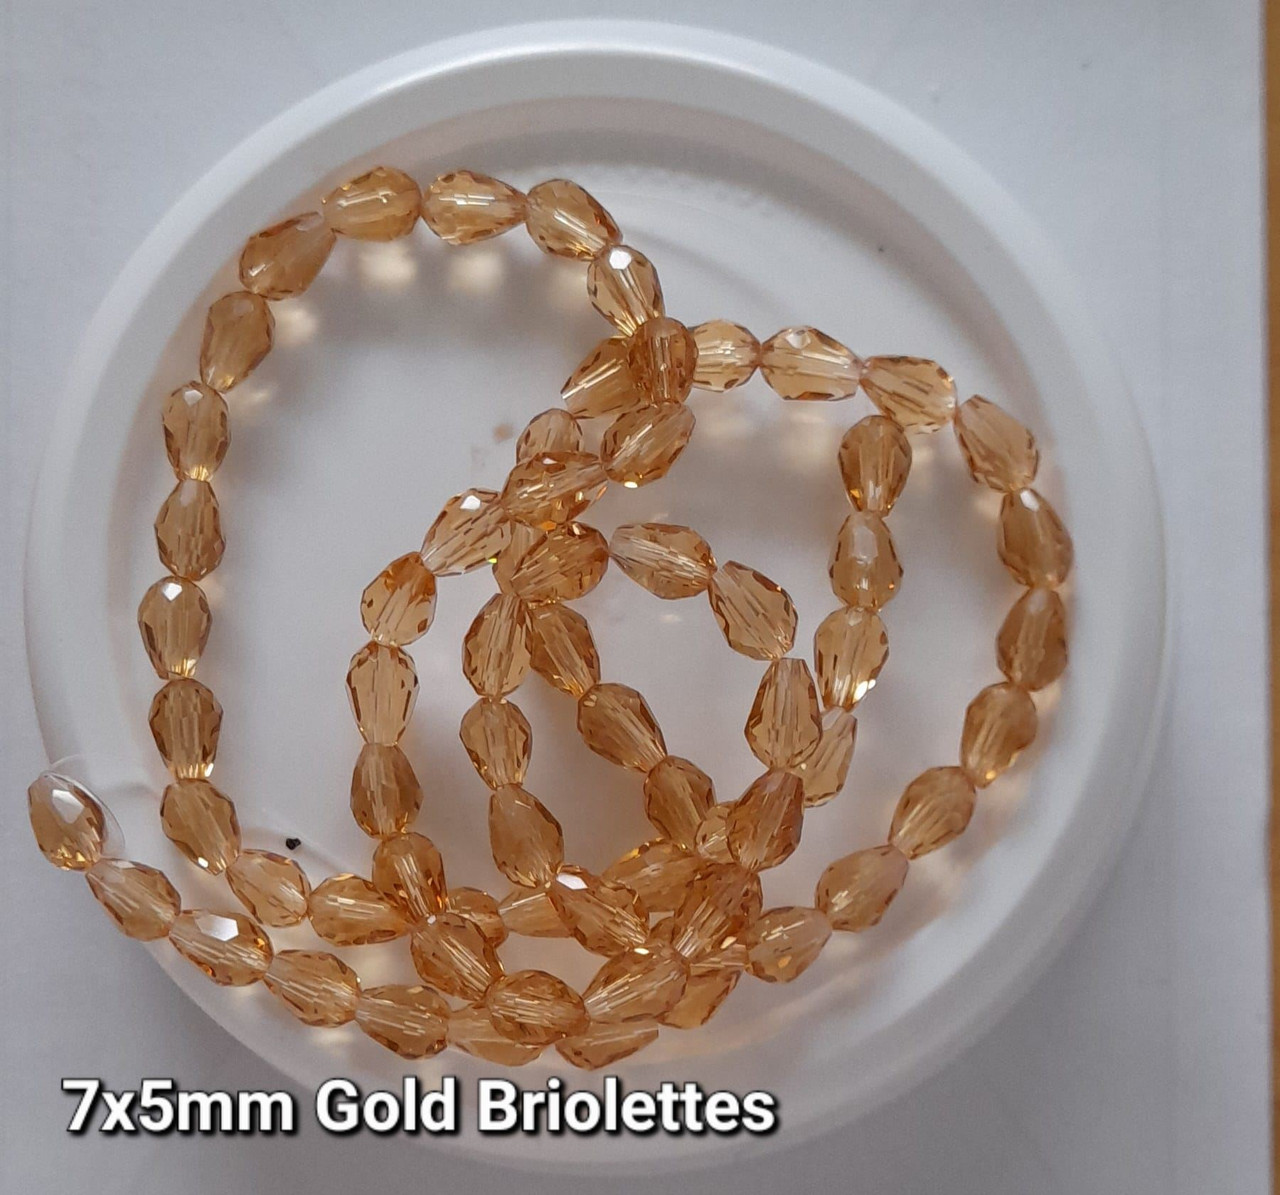 Strand of faceted drop glass beads (briolettes) - approx 7x5mm, Gold, approx 70 beads